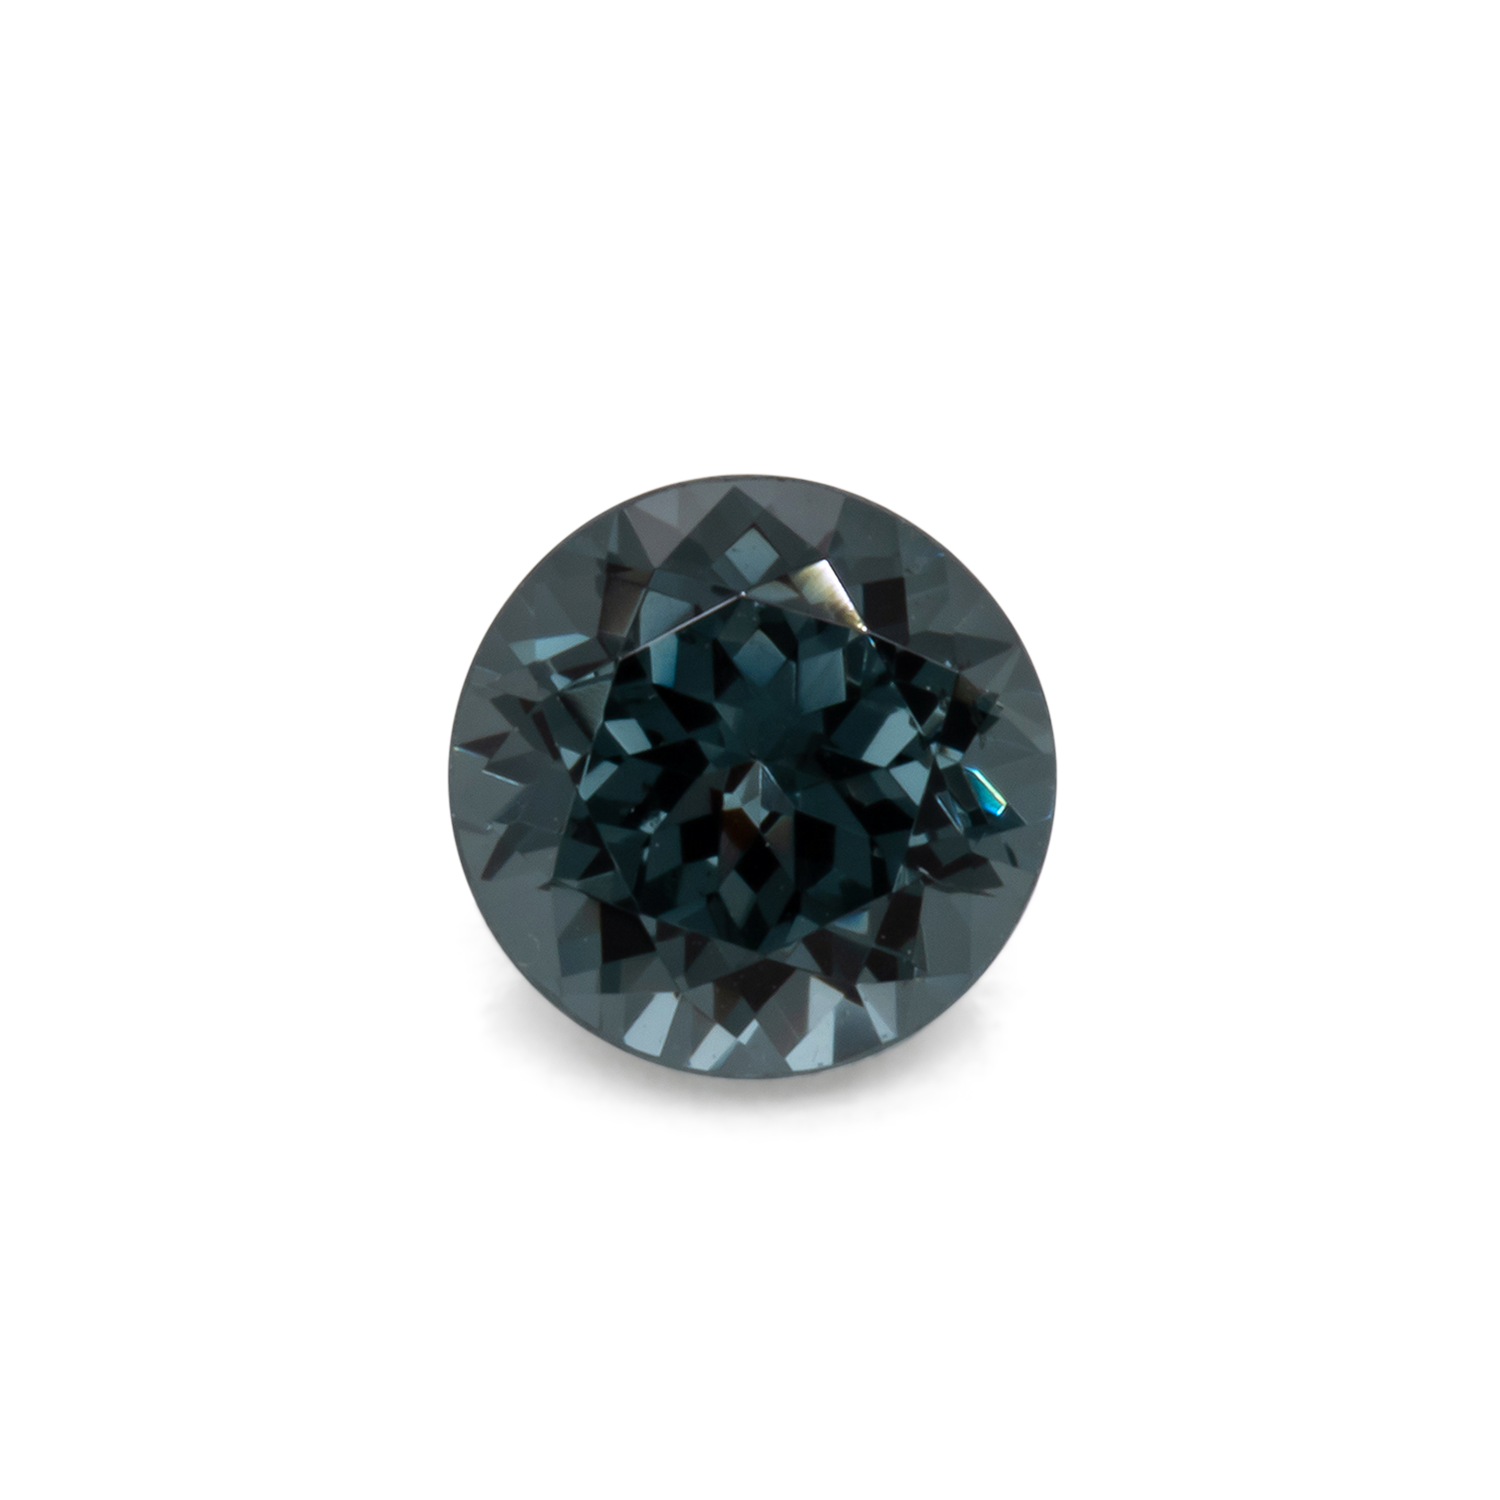 Spinel - grey, round, 5.1x5.1 mm, 0.60 cts, No. SP90056